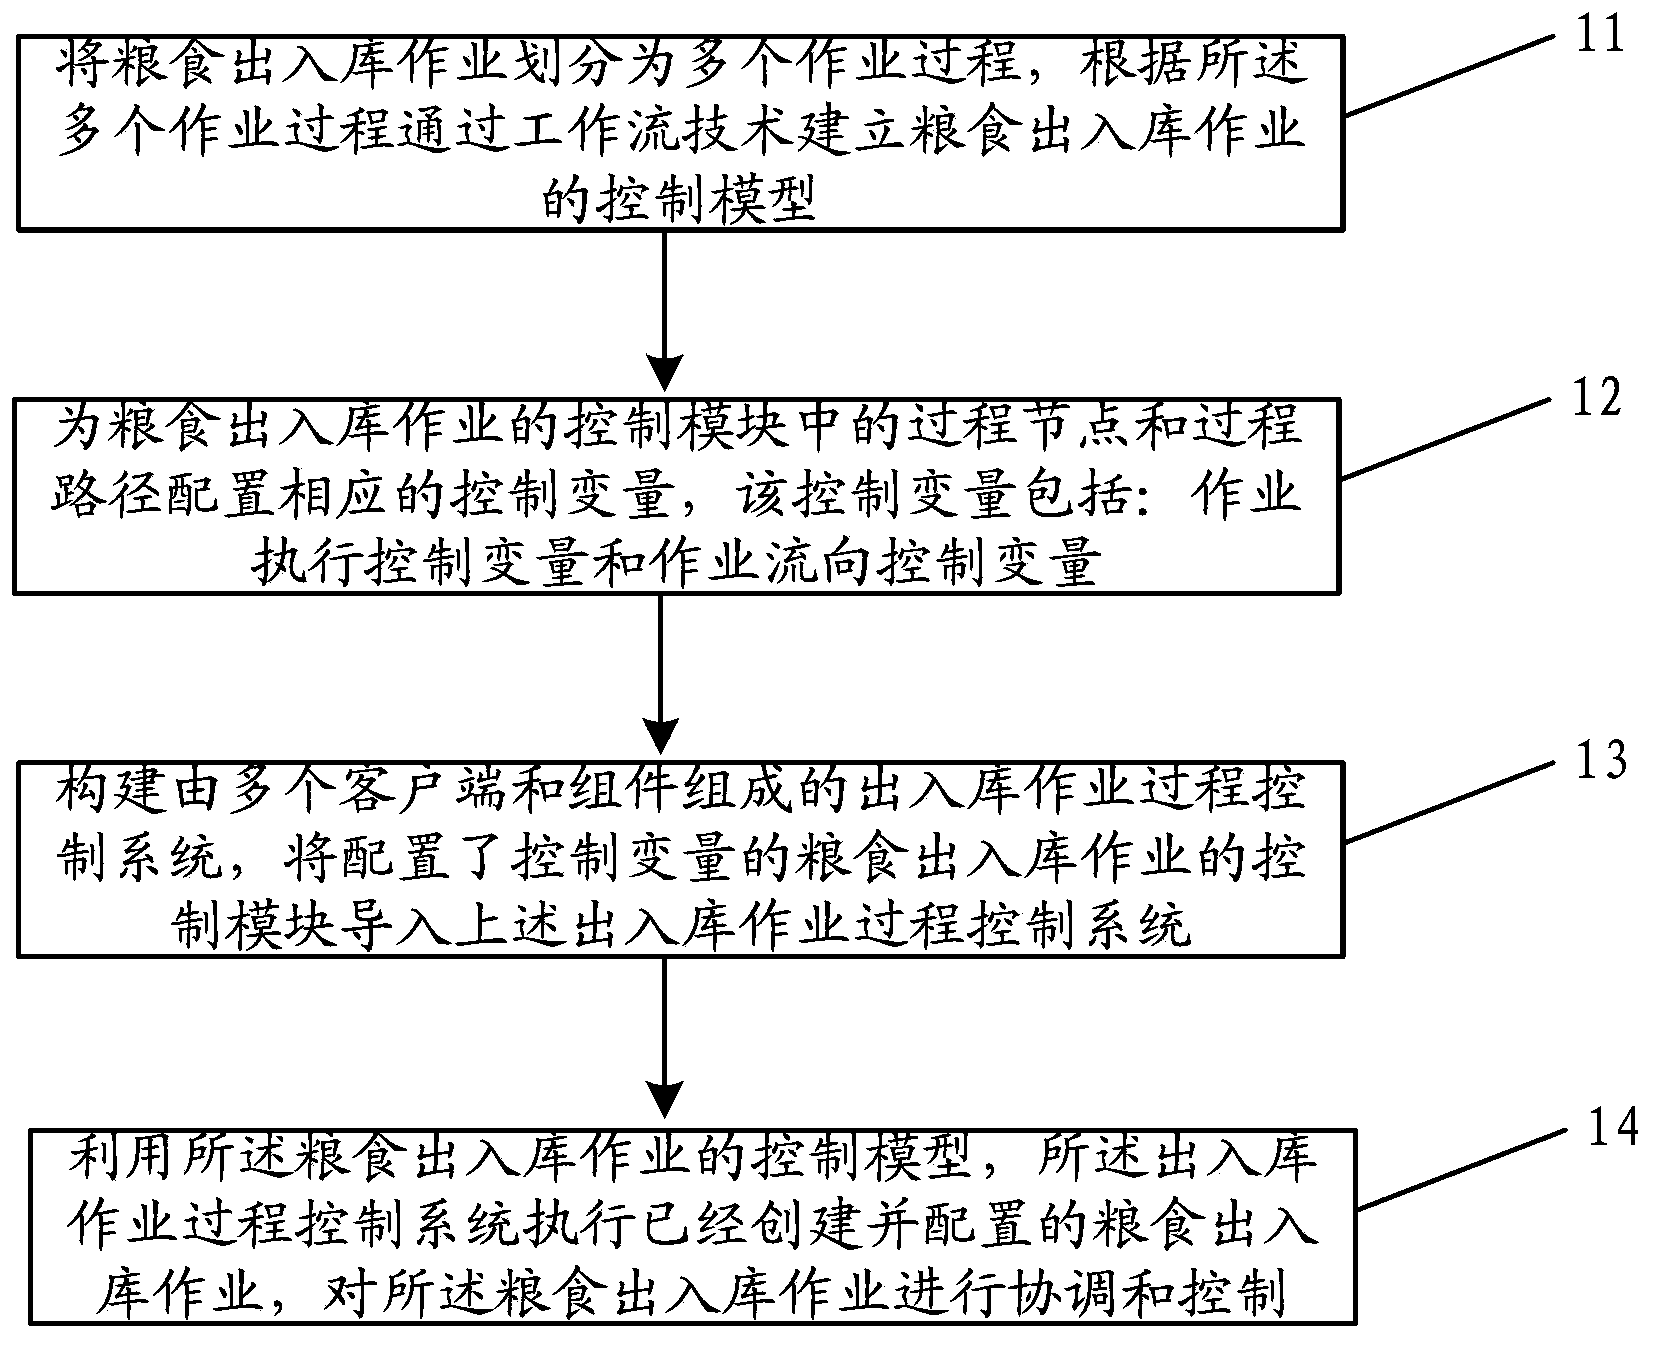 Method for controlling operation of putting grain in and out of warehouse